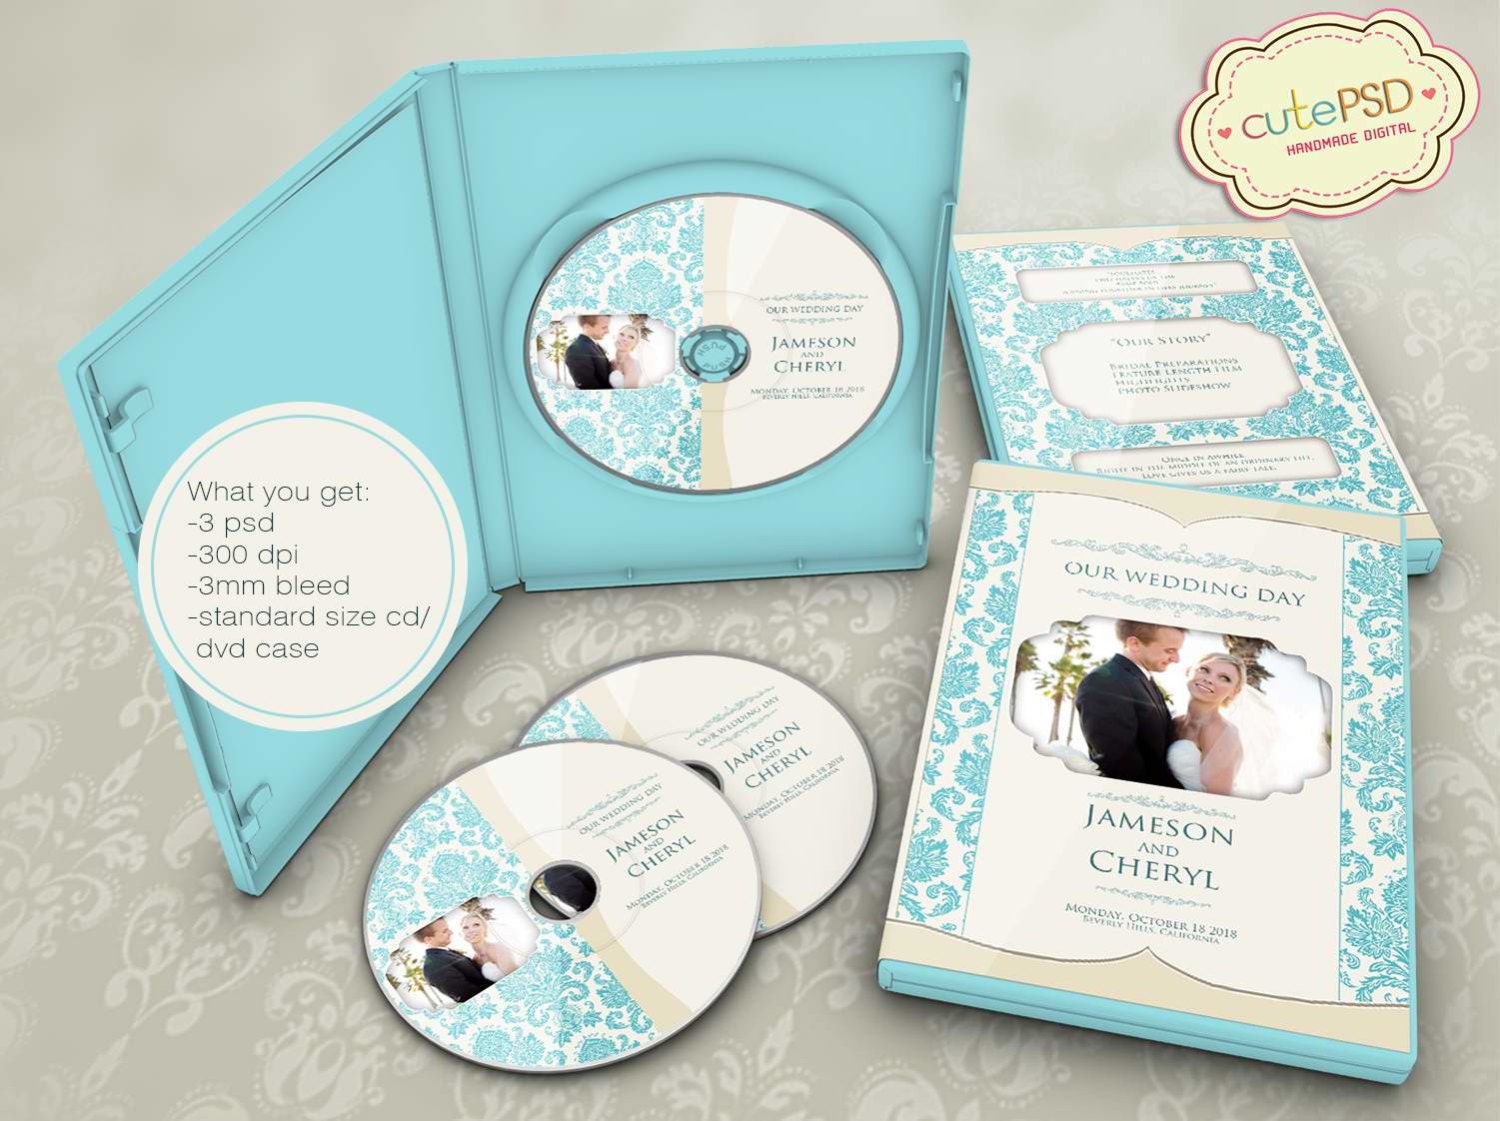 indian wedding dvd cover template psd free download